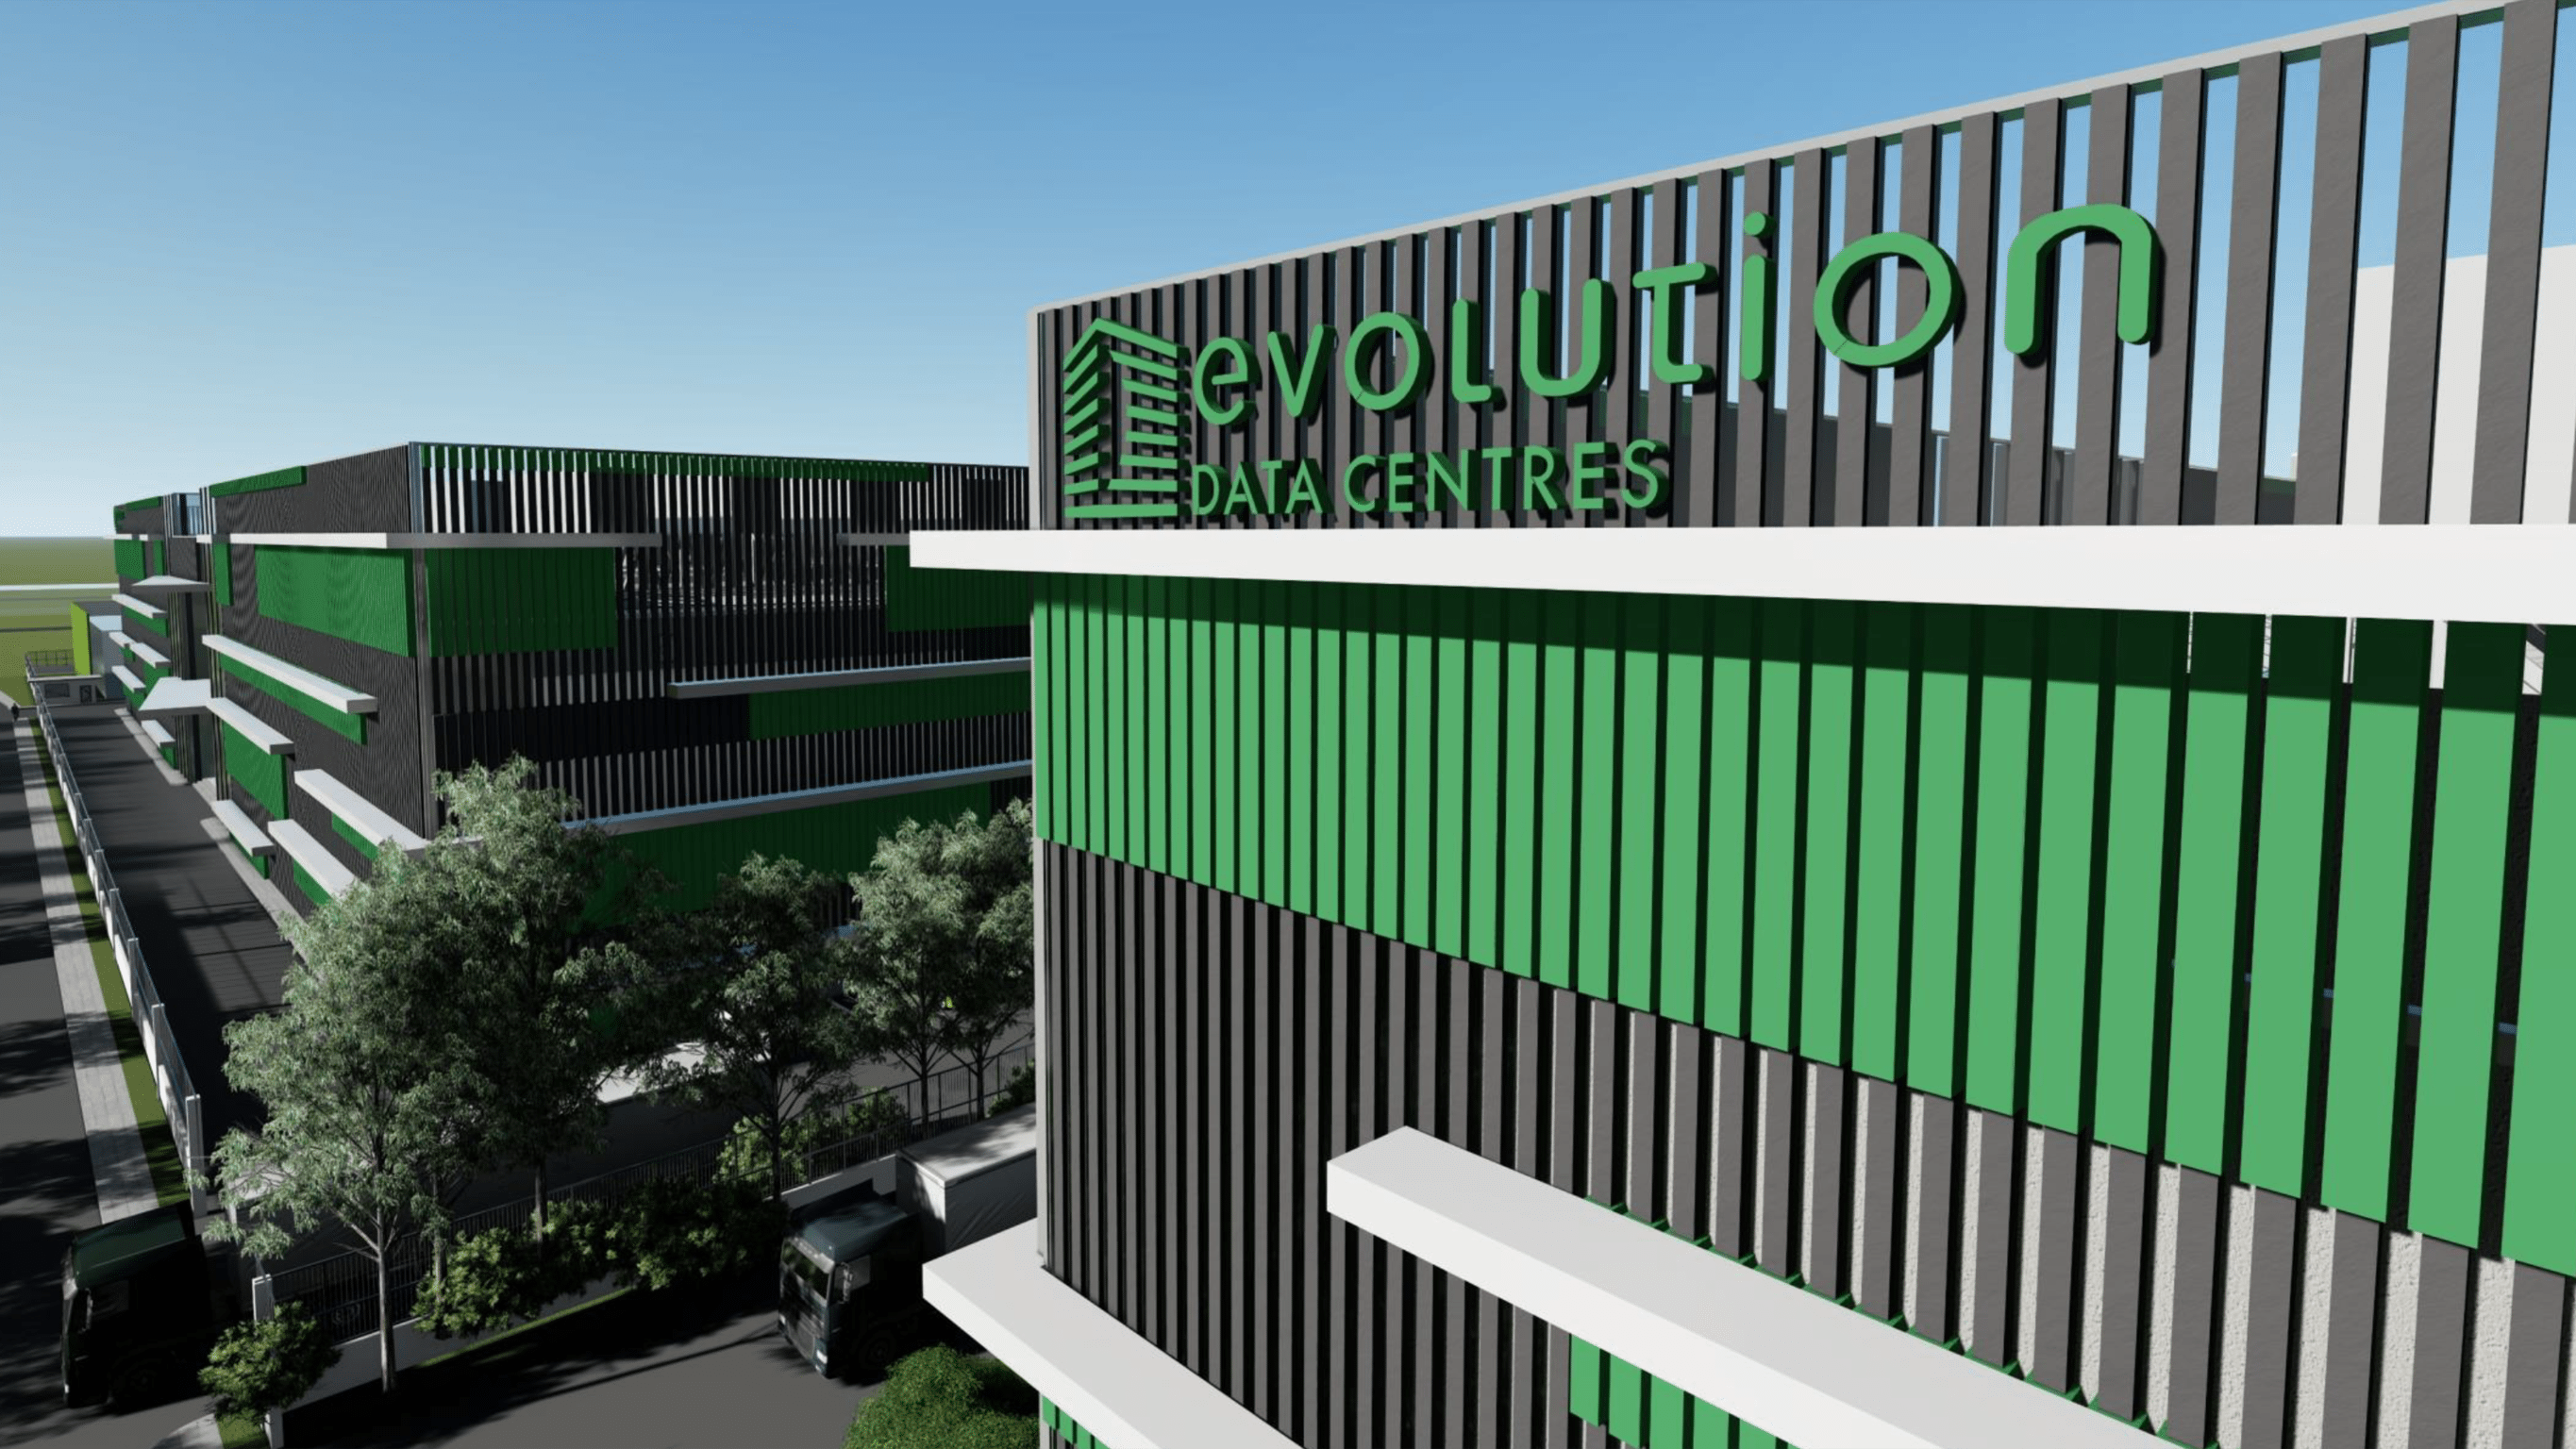 Evolution Partners with Warburg Pincus to Develop Sustainable Data Centres in Southeast Asia